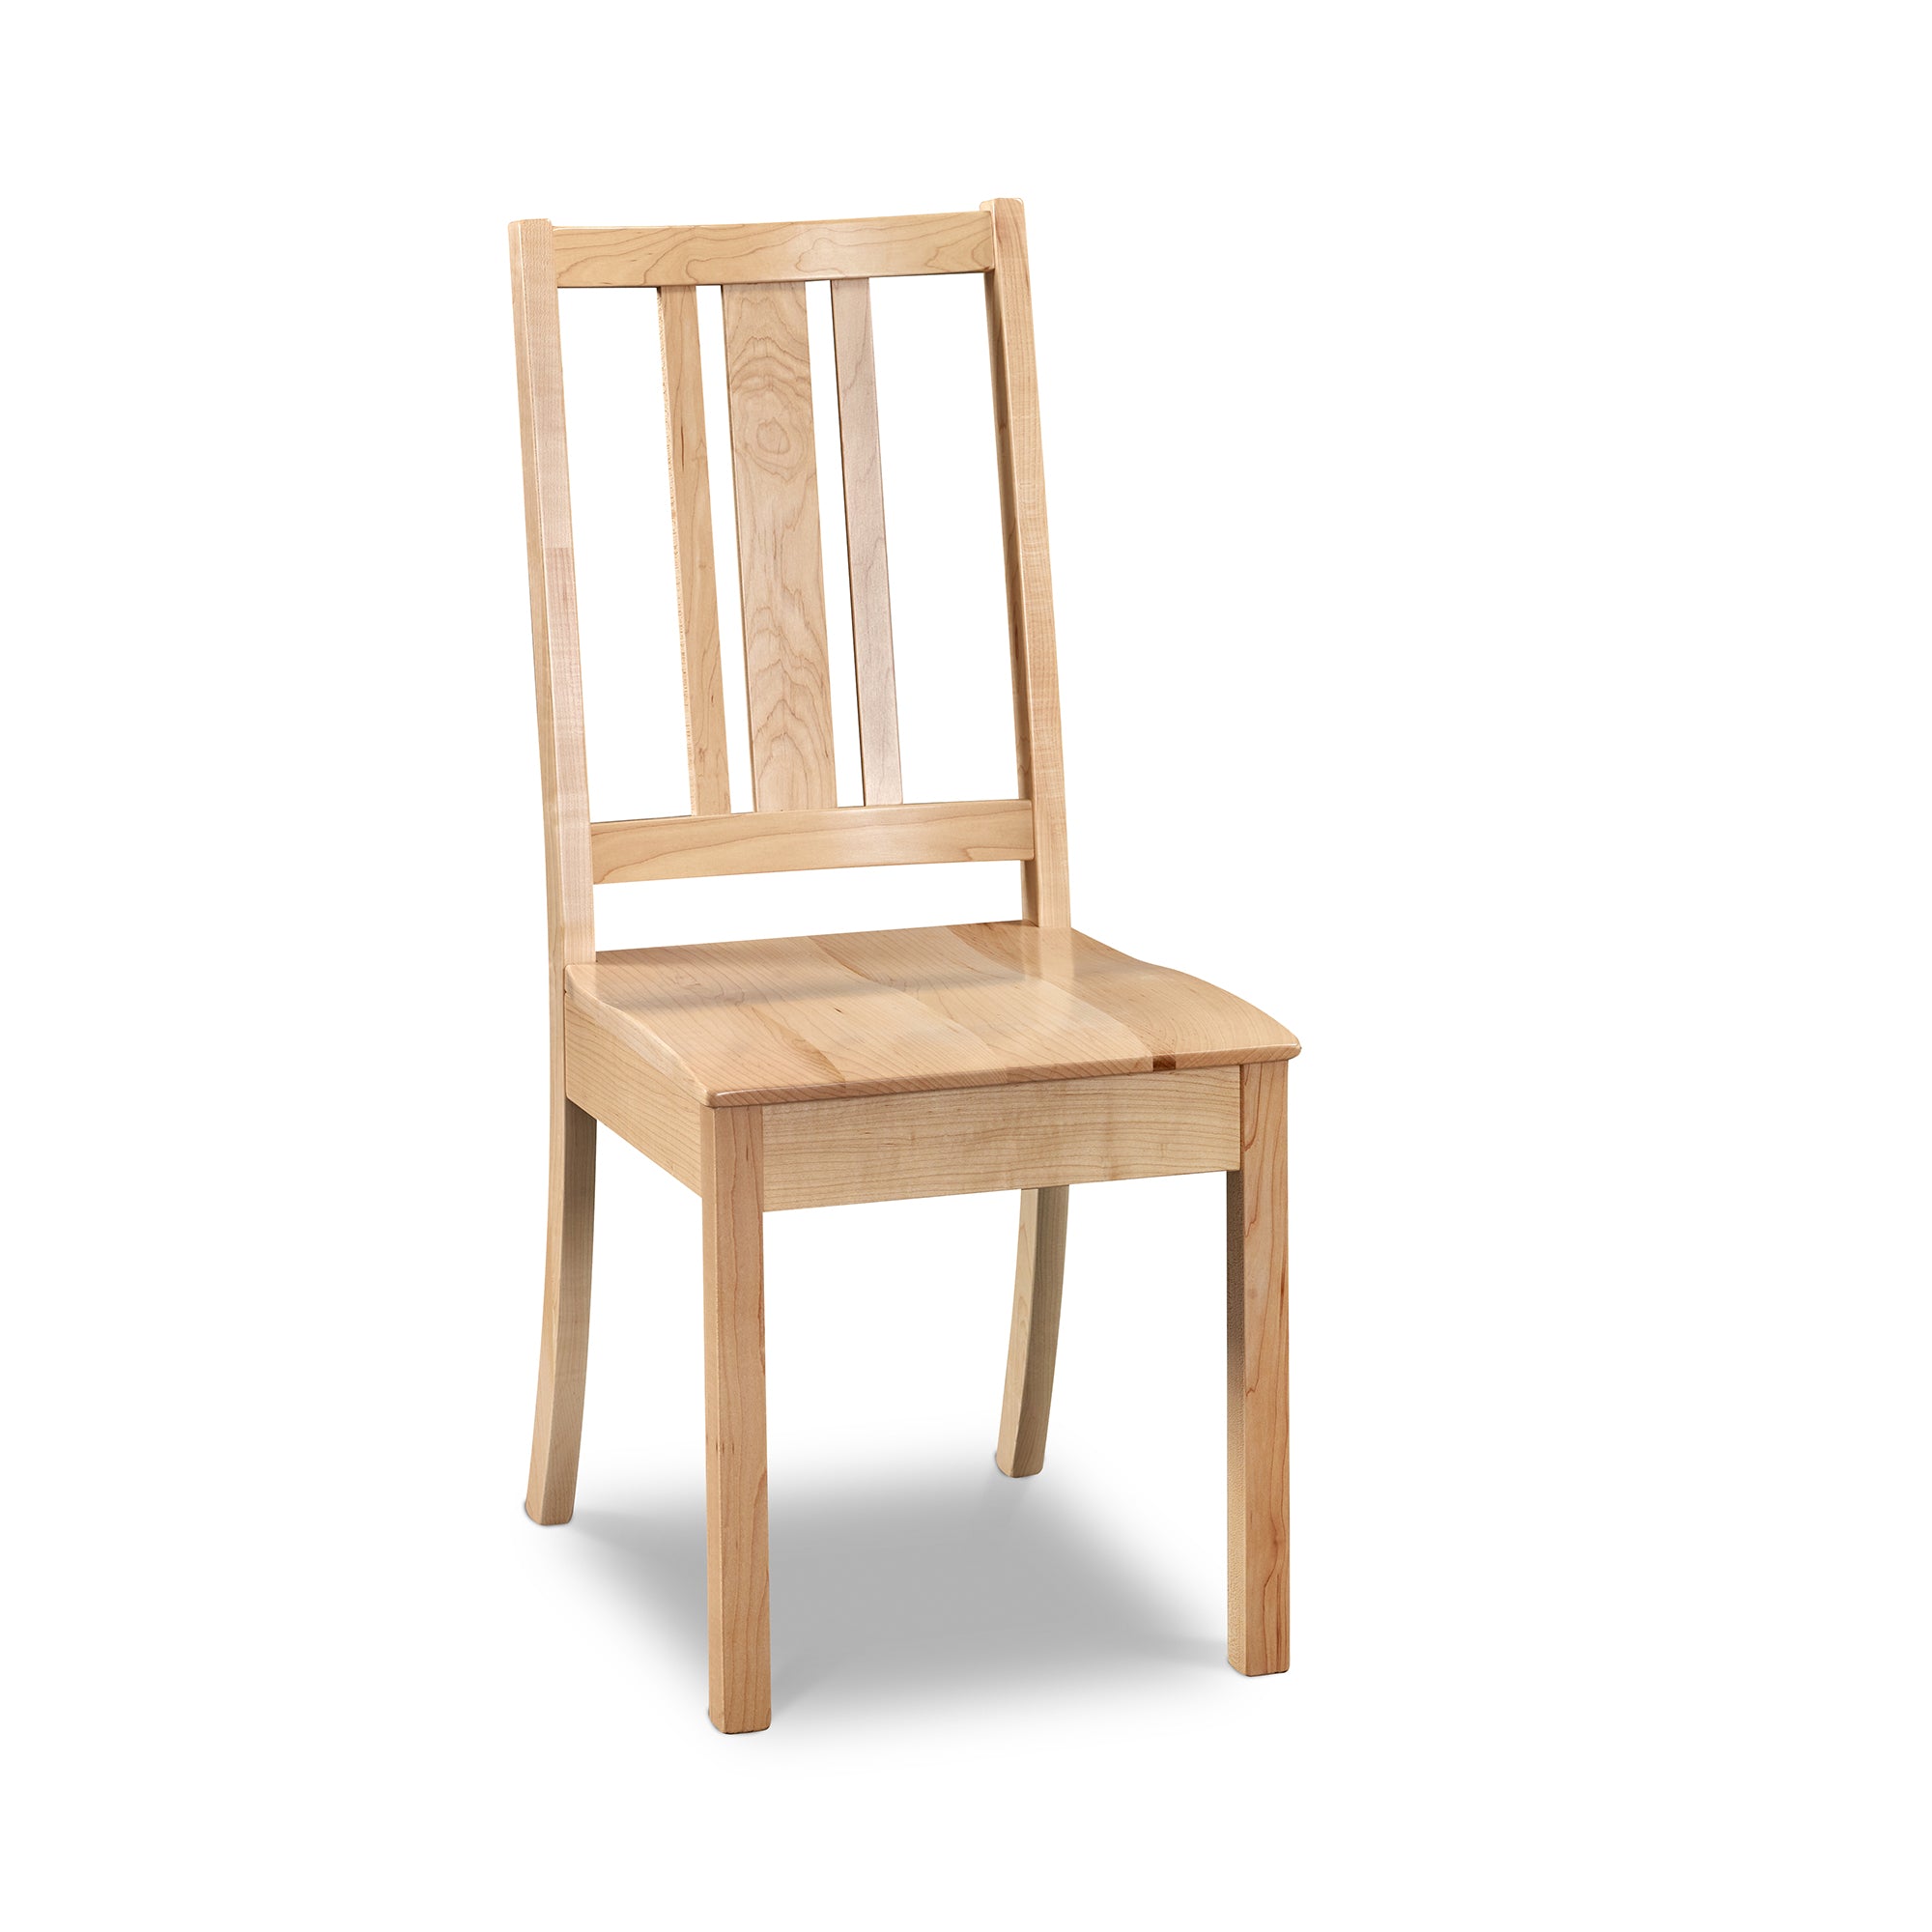 Simple Bungalow inspired side chair with squared back in hard maple wood